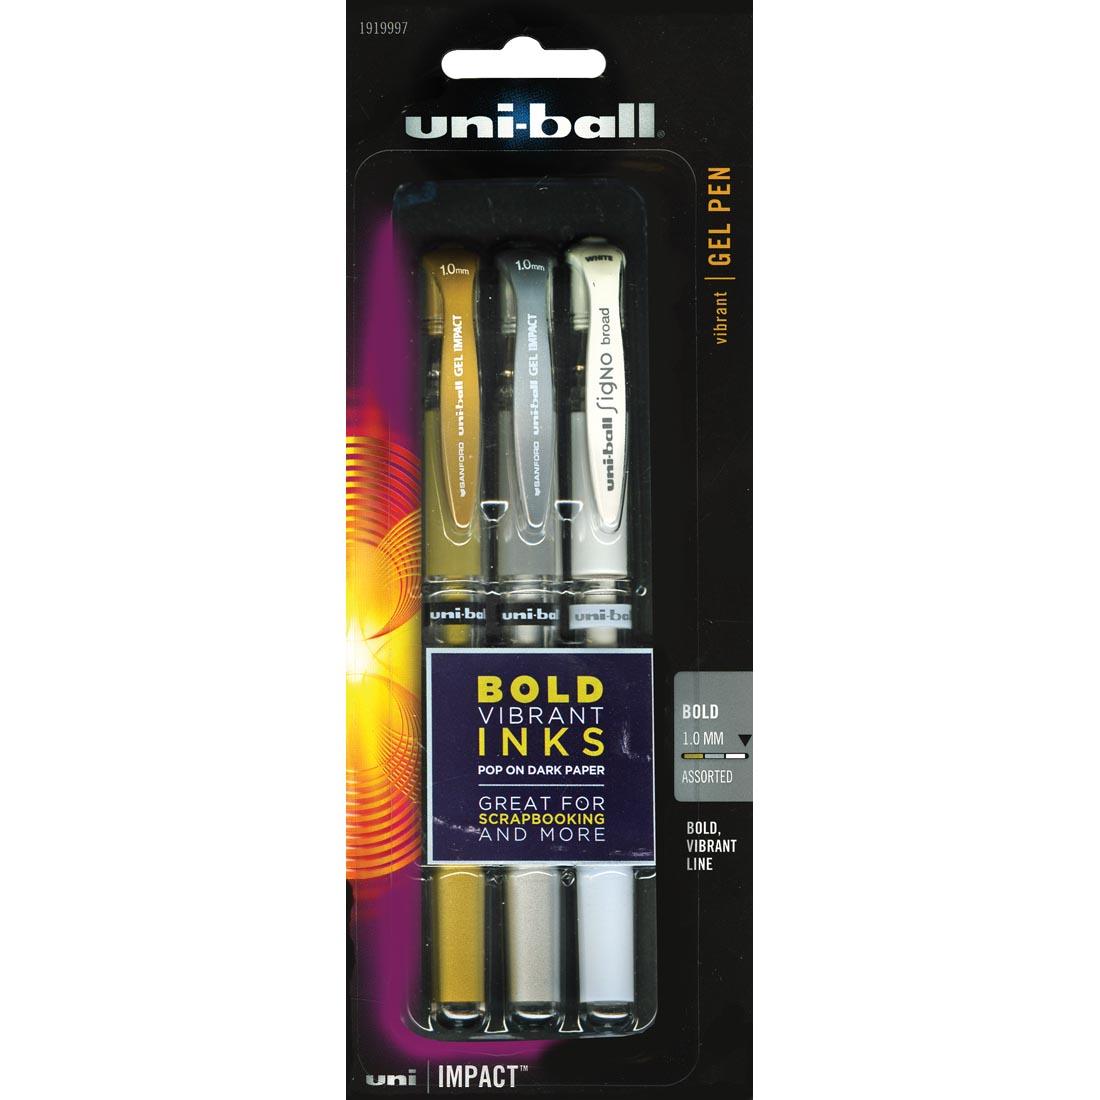 uni-ball Gel Pen Set with gold, silver and white pens